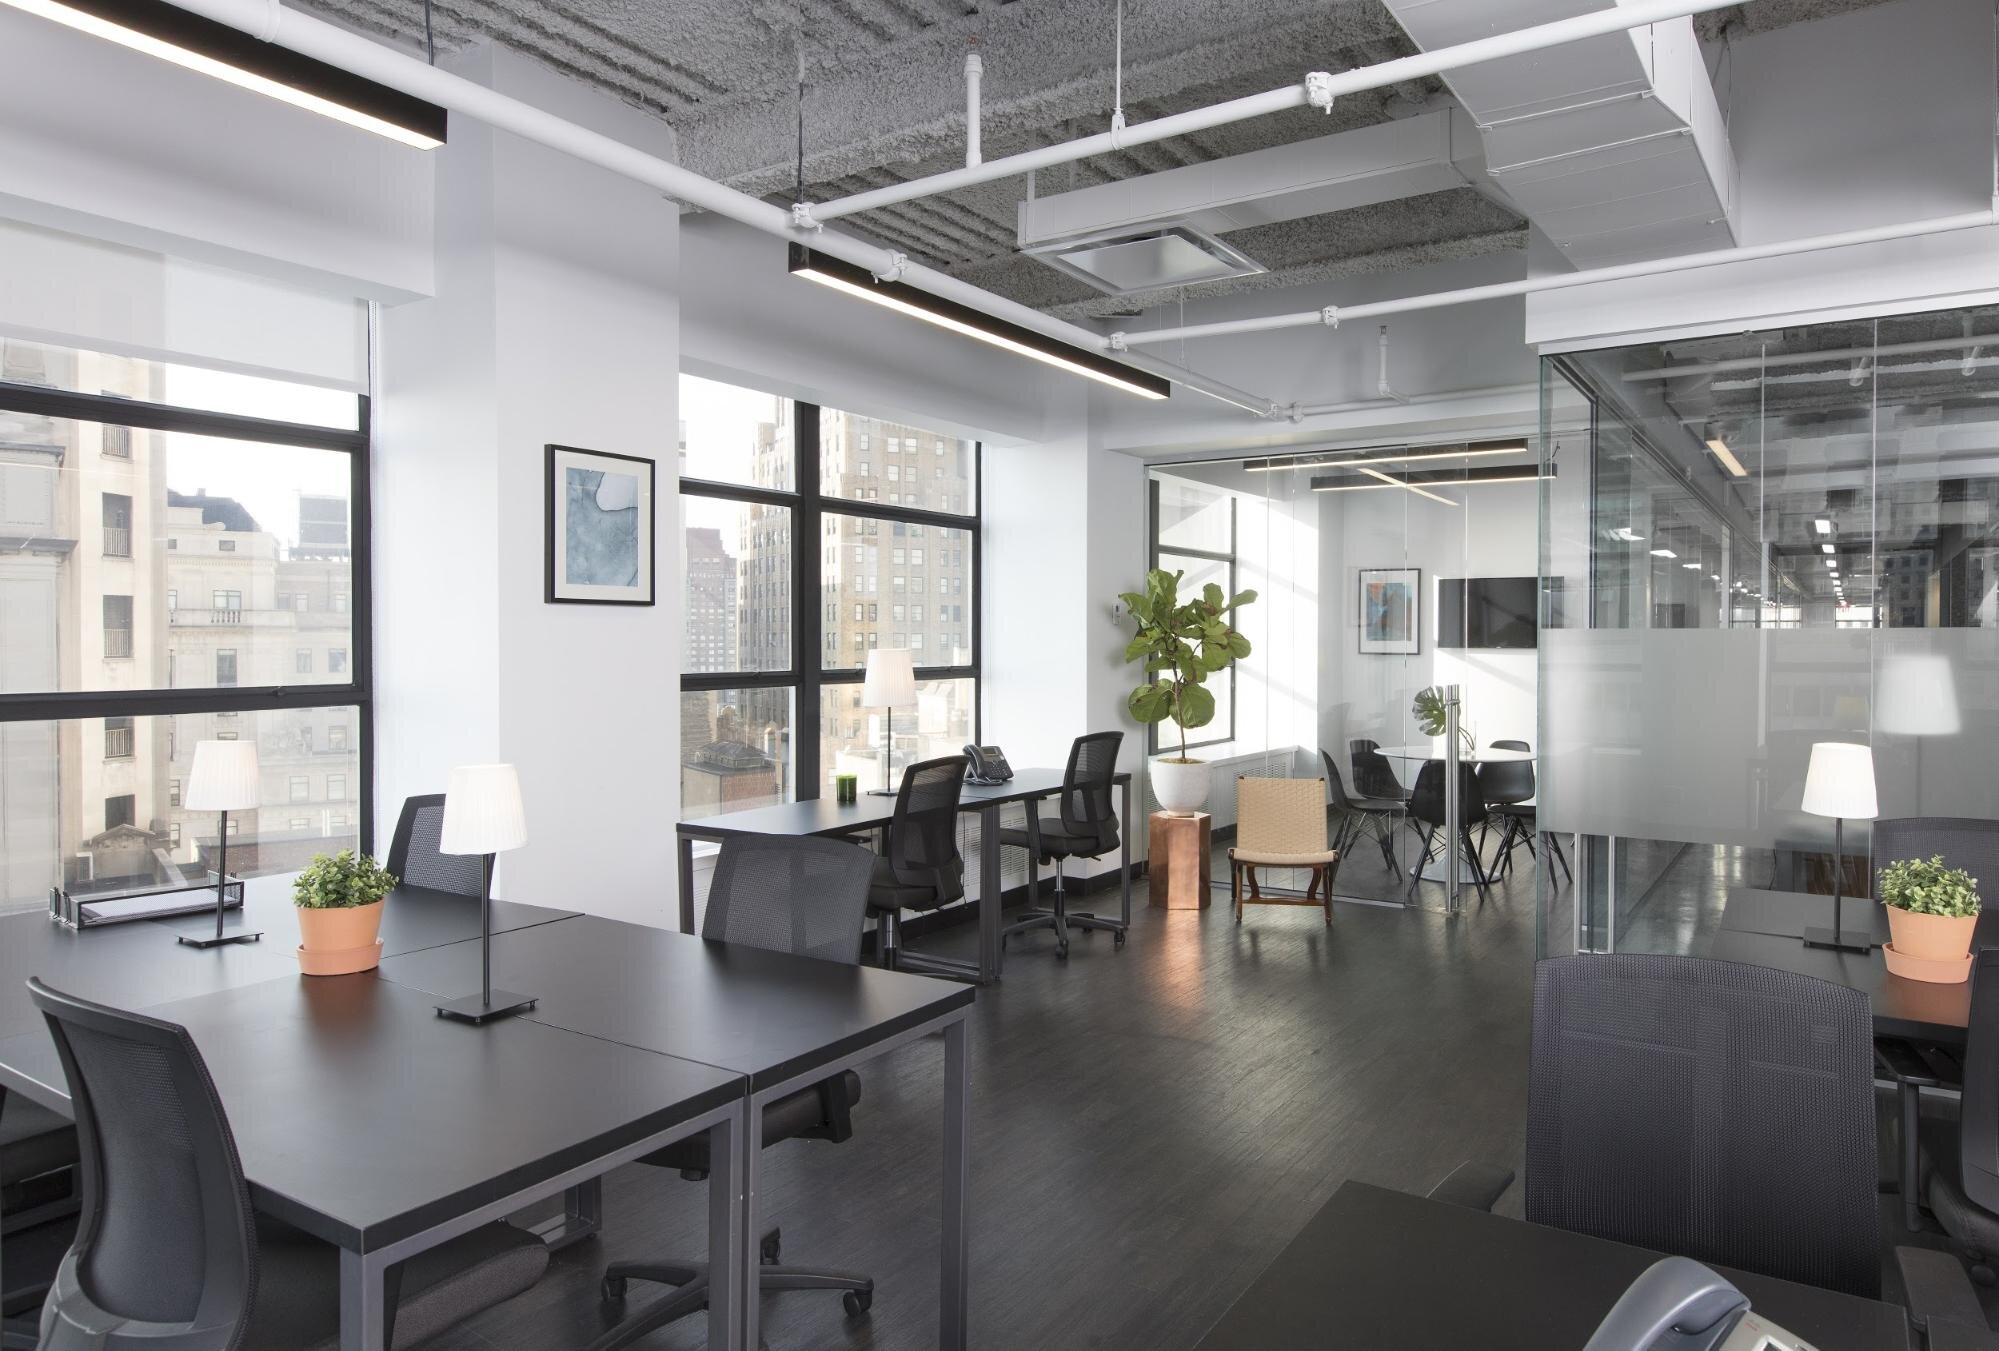 Open space office space planning with natural light and fresh plants